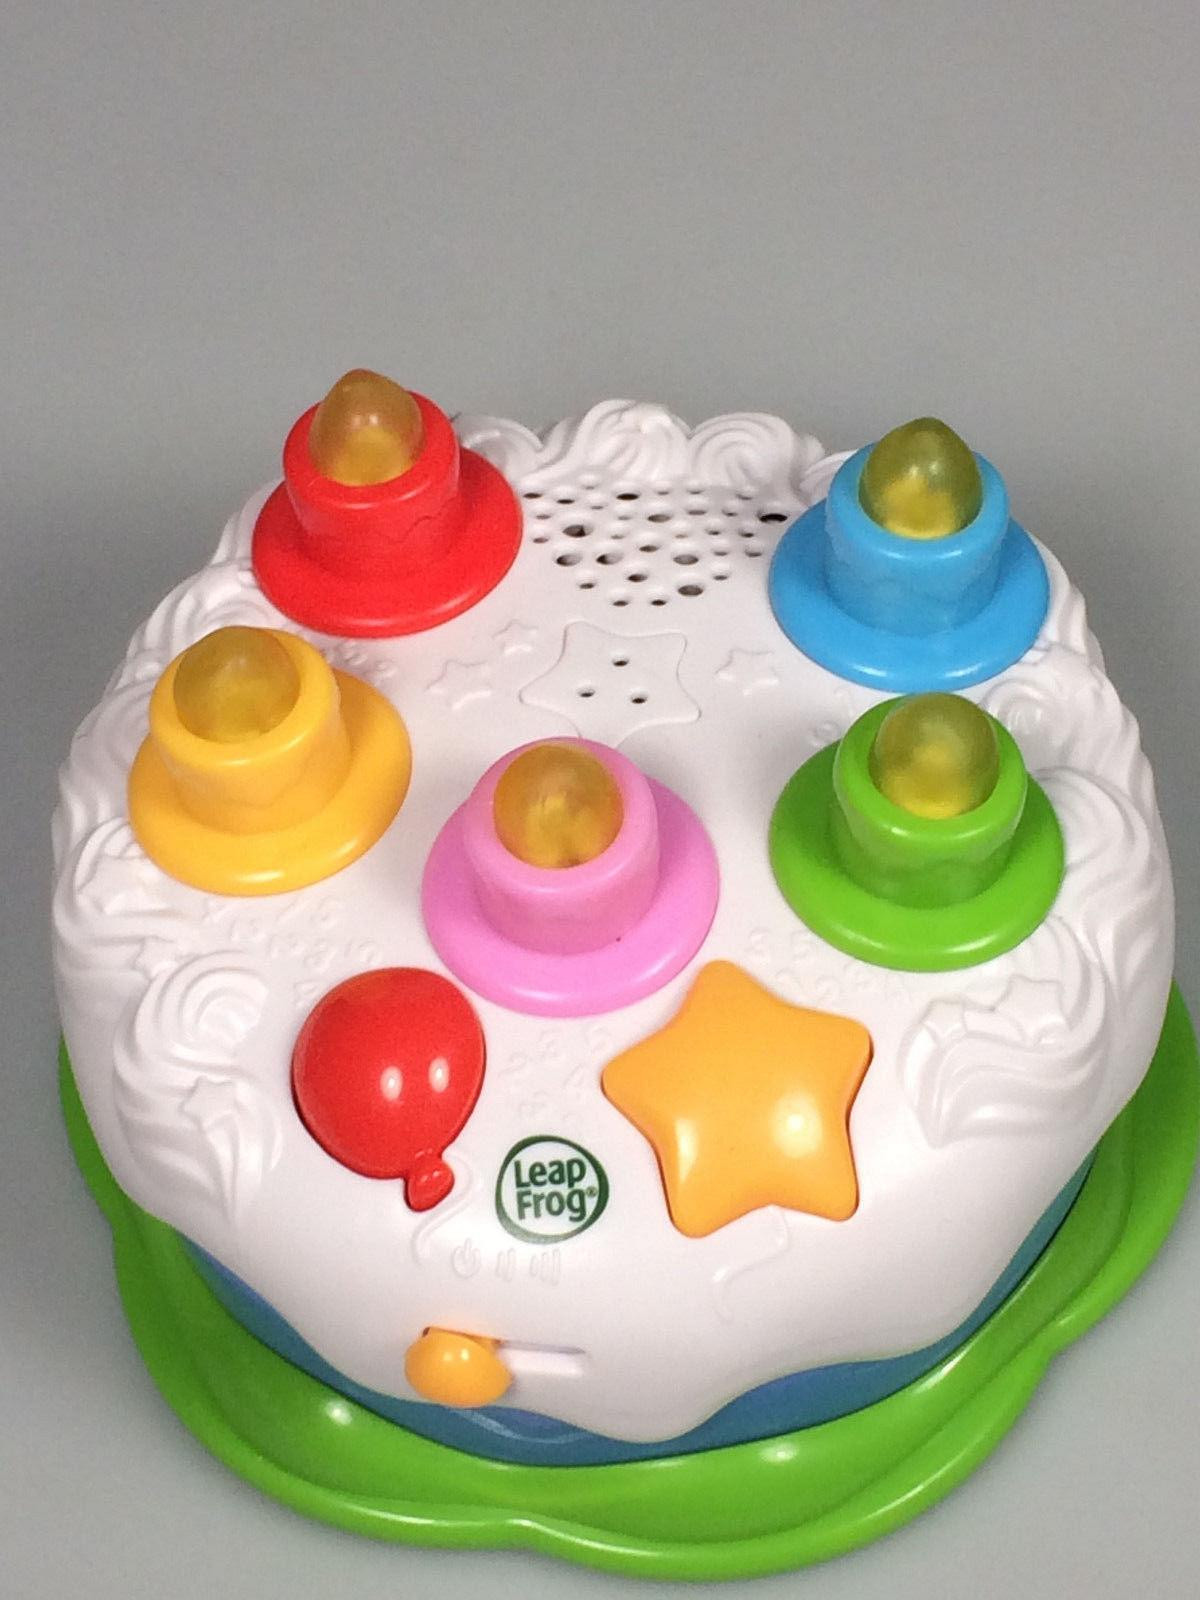 Leapfrog Birthday Cake
 Leap Frog Counting Candles Birthday Cake Music Toy gross